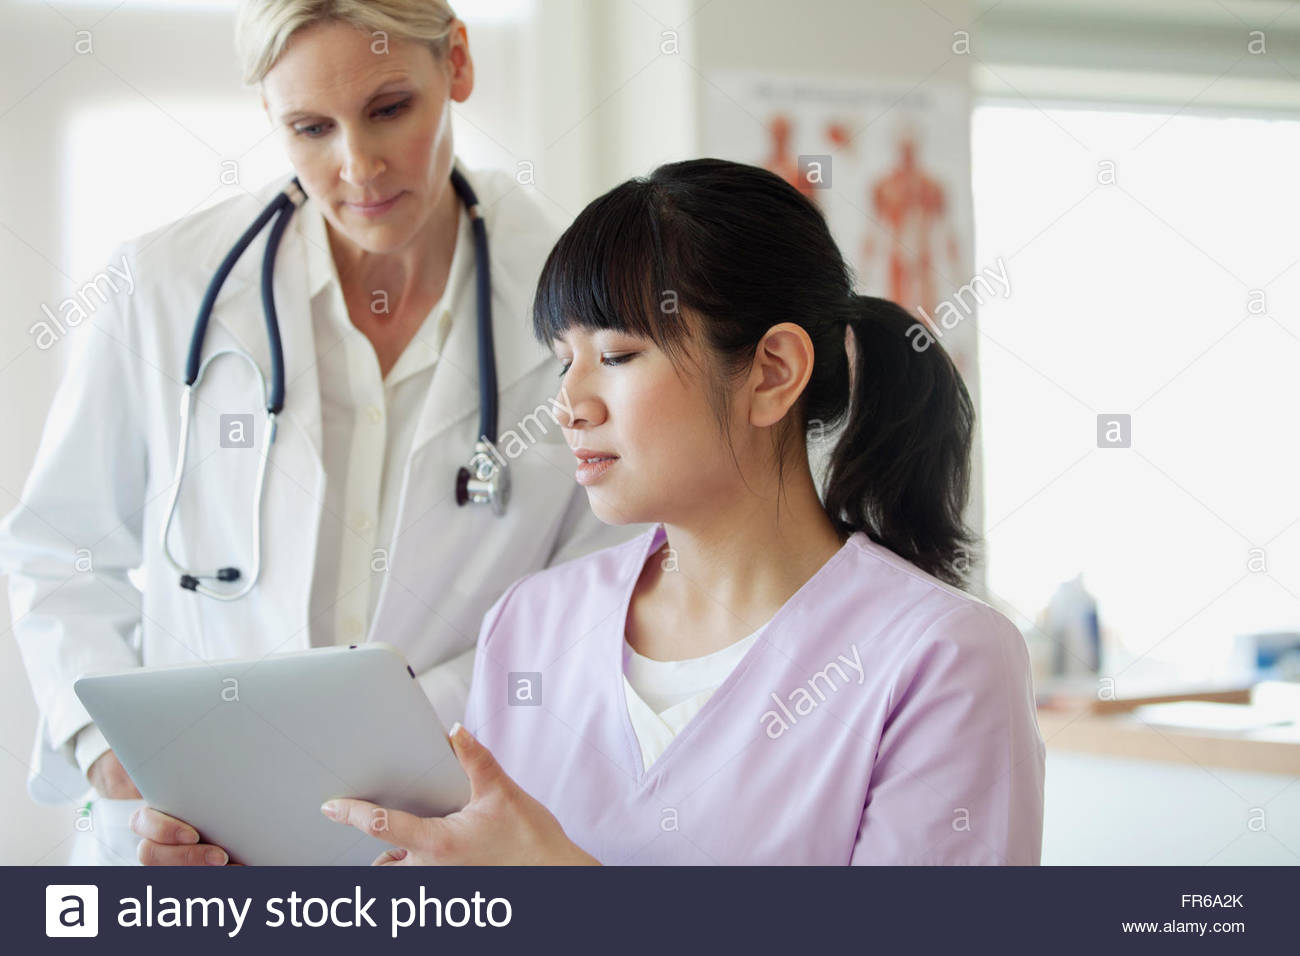 doctor and assistant consulting Stock Photo